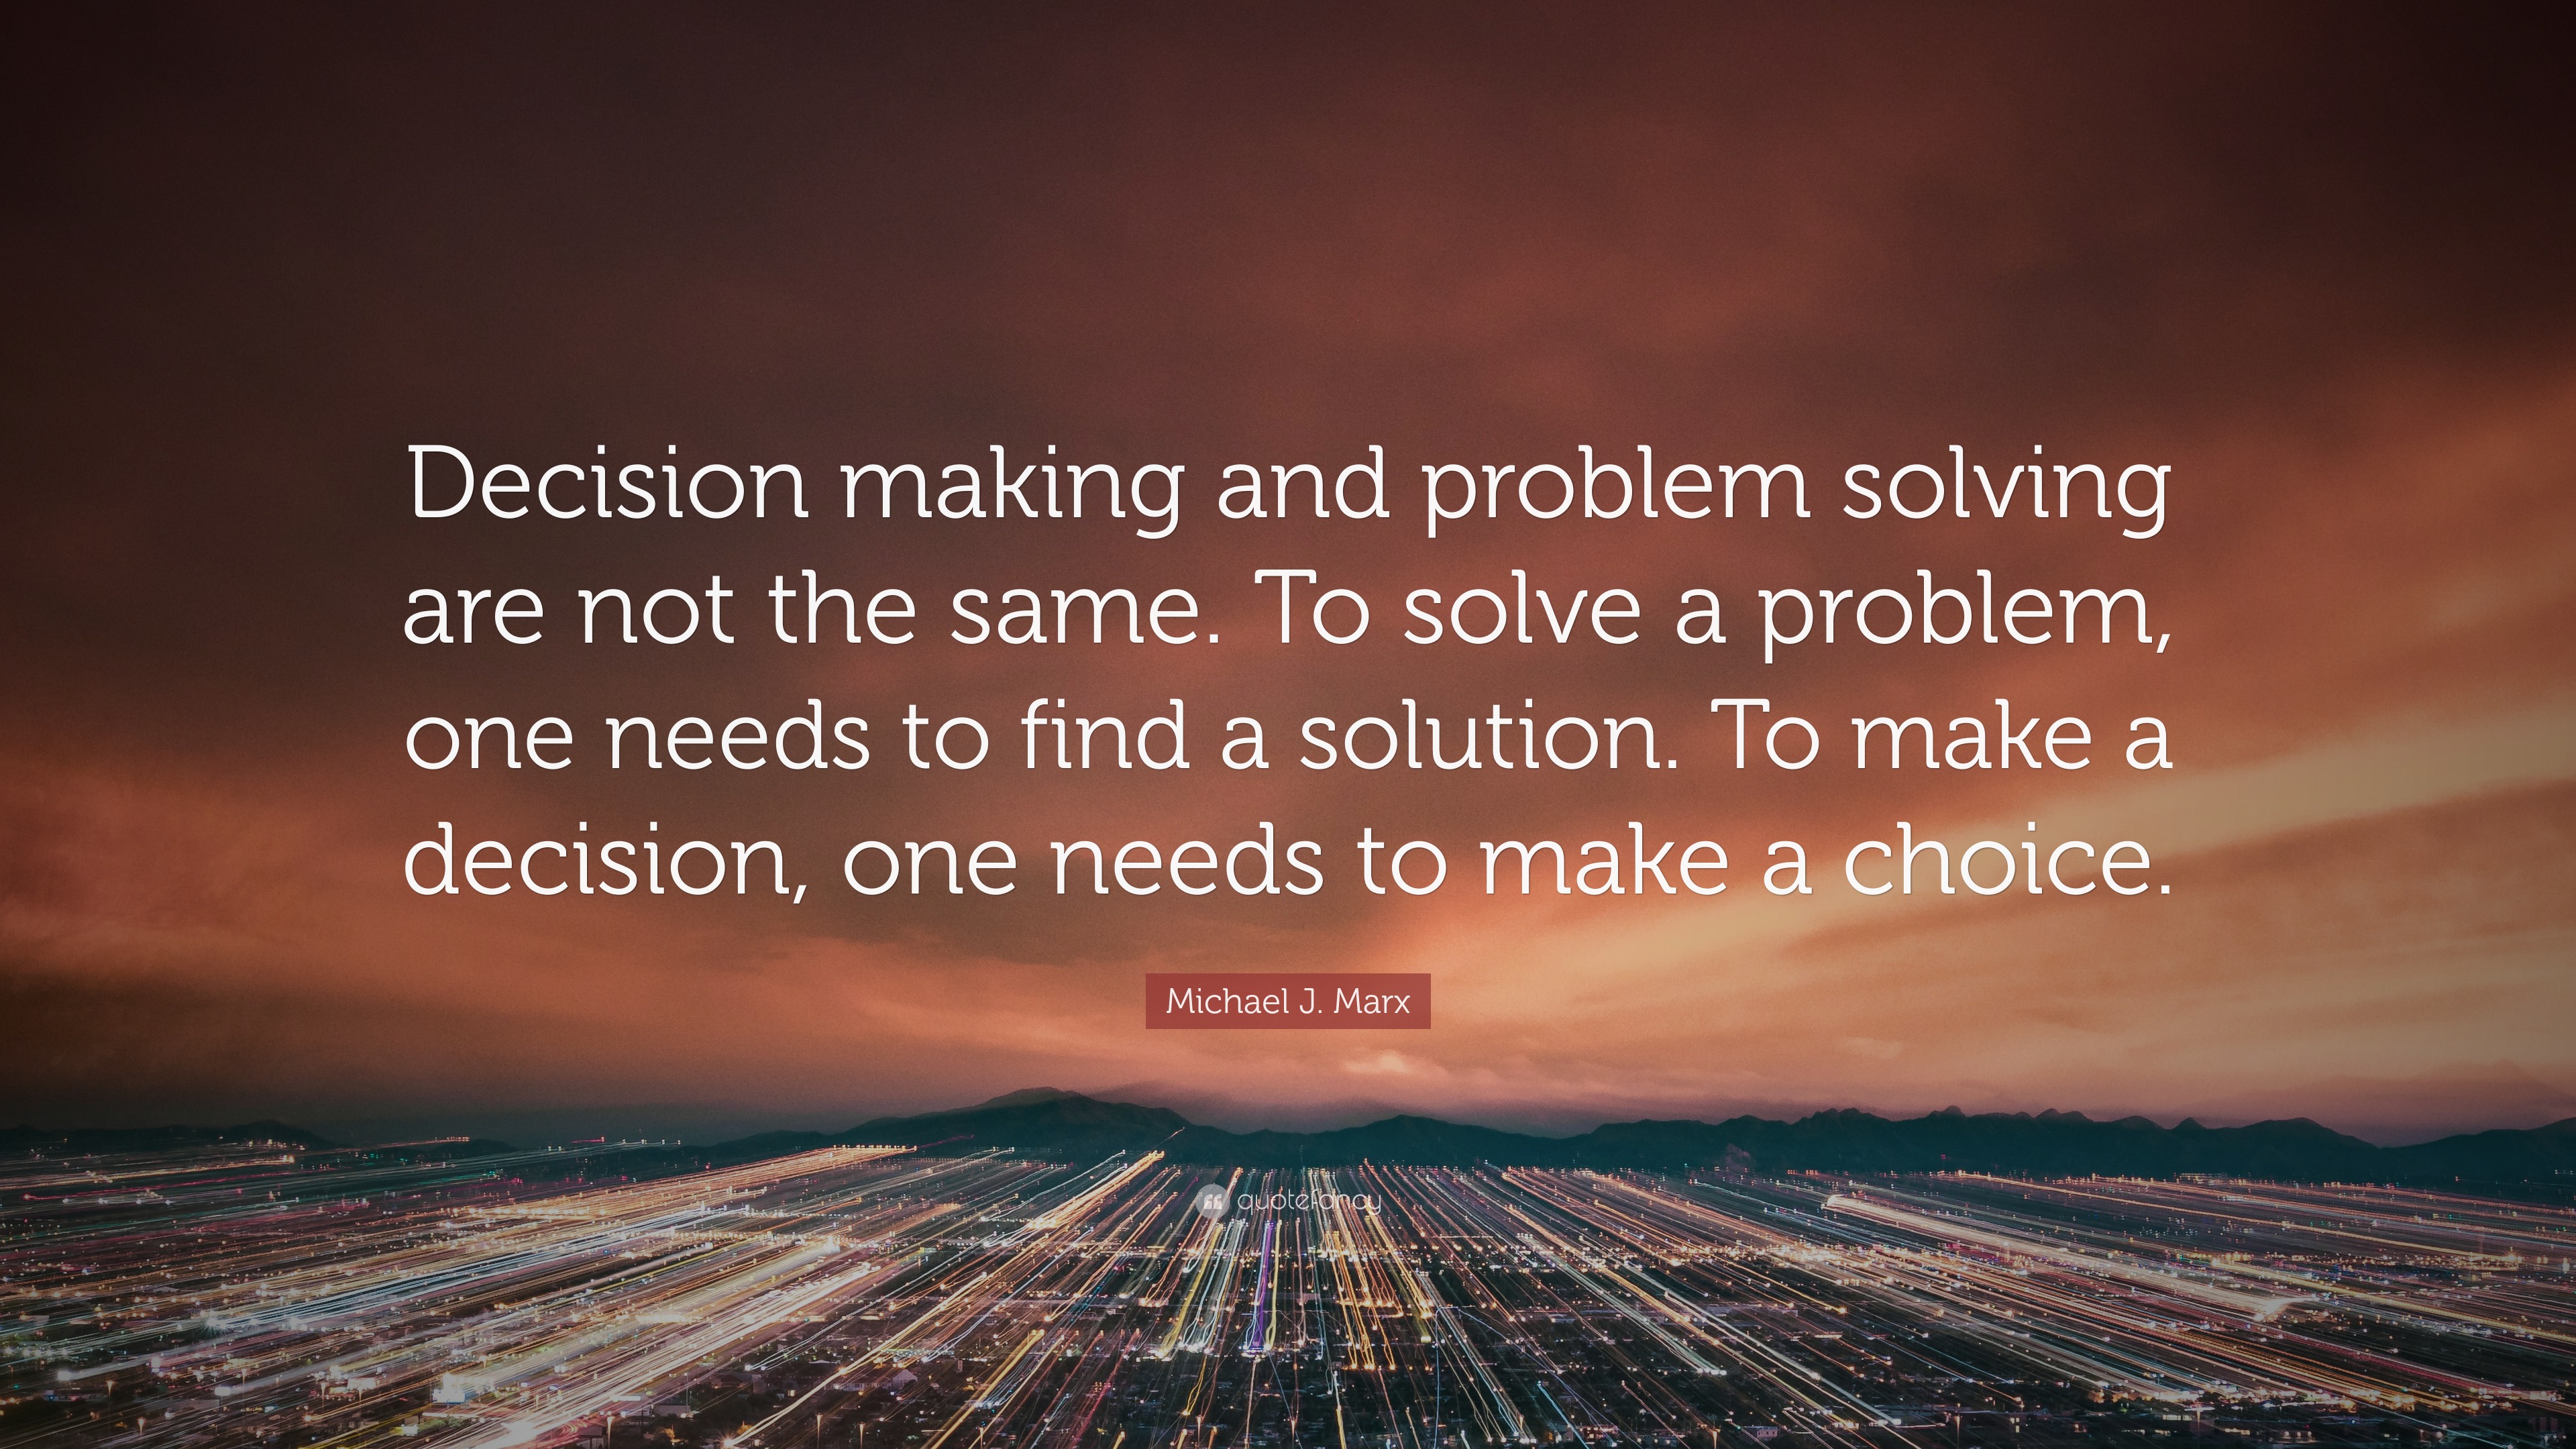 is decision making and problem solving the same